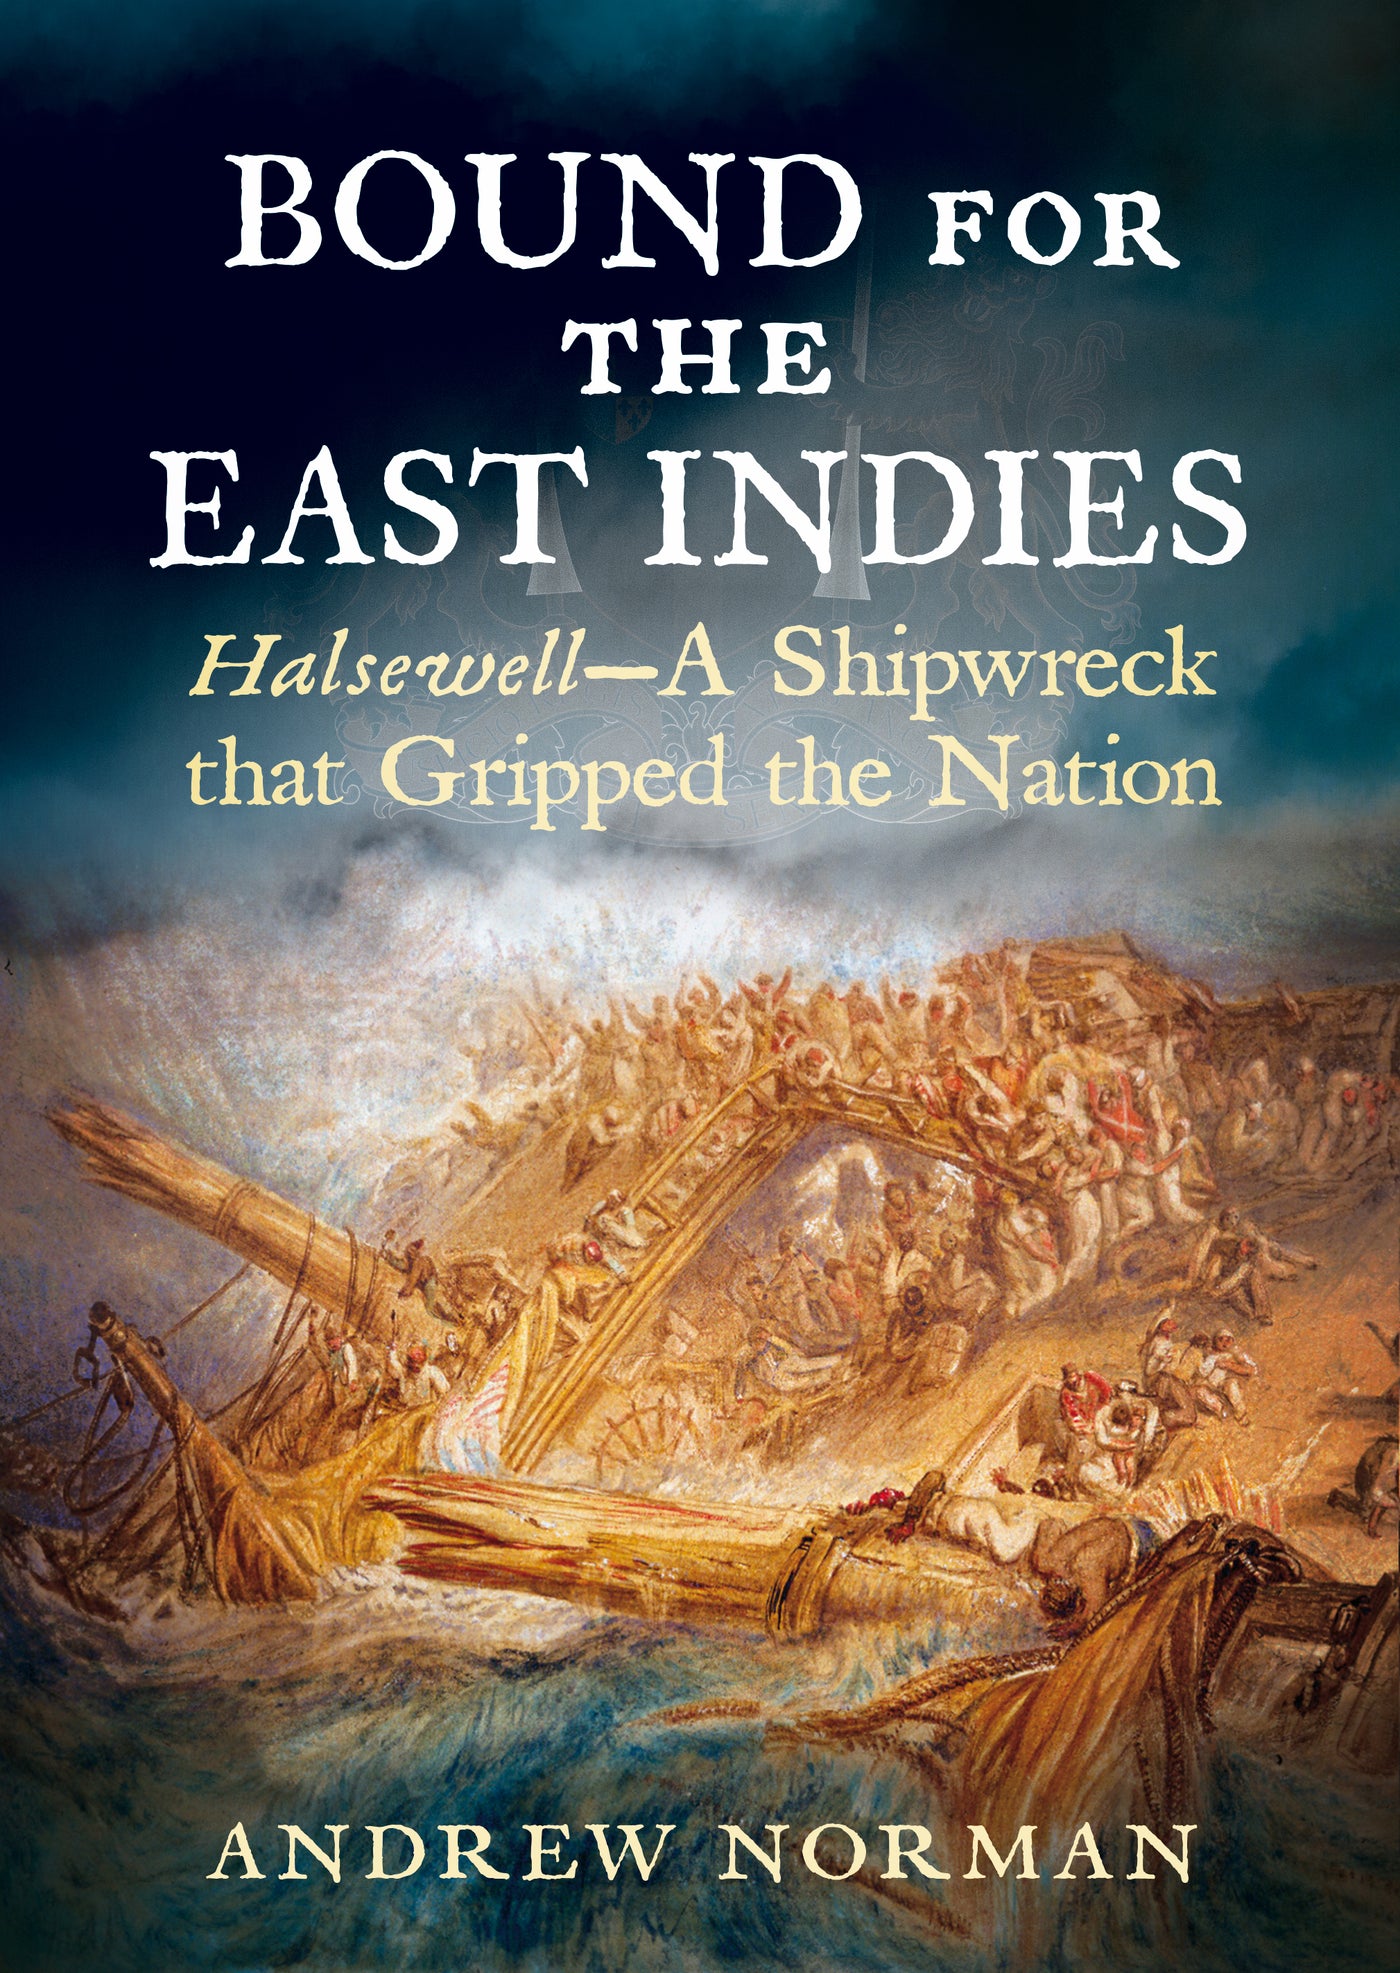 Bound for the East Indies